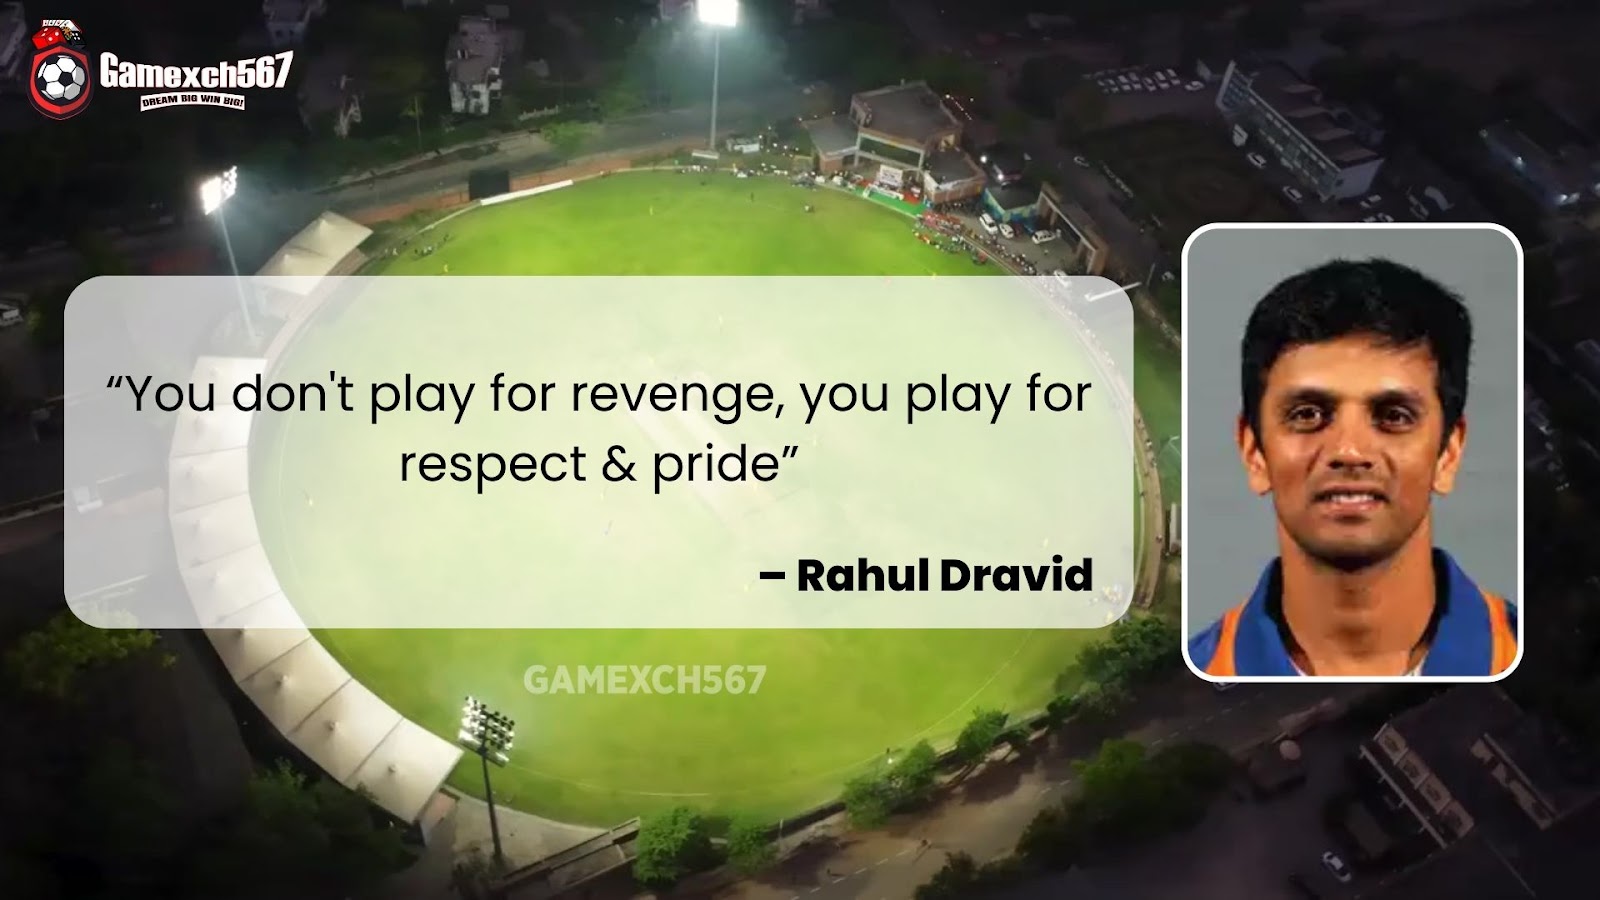 Quotes by cricketers - Rahul Dravid